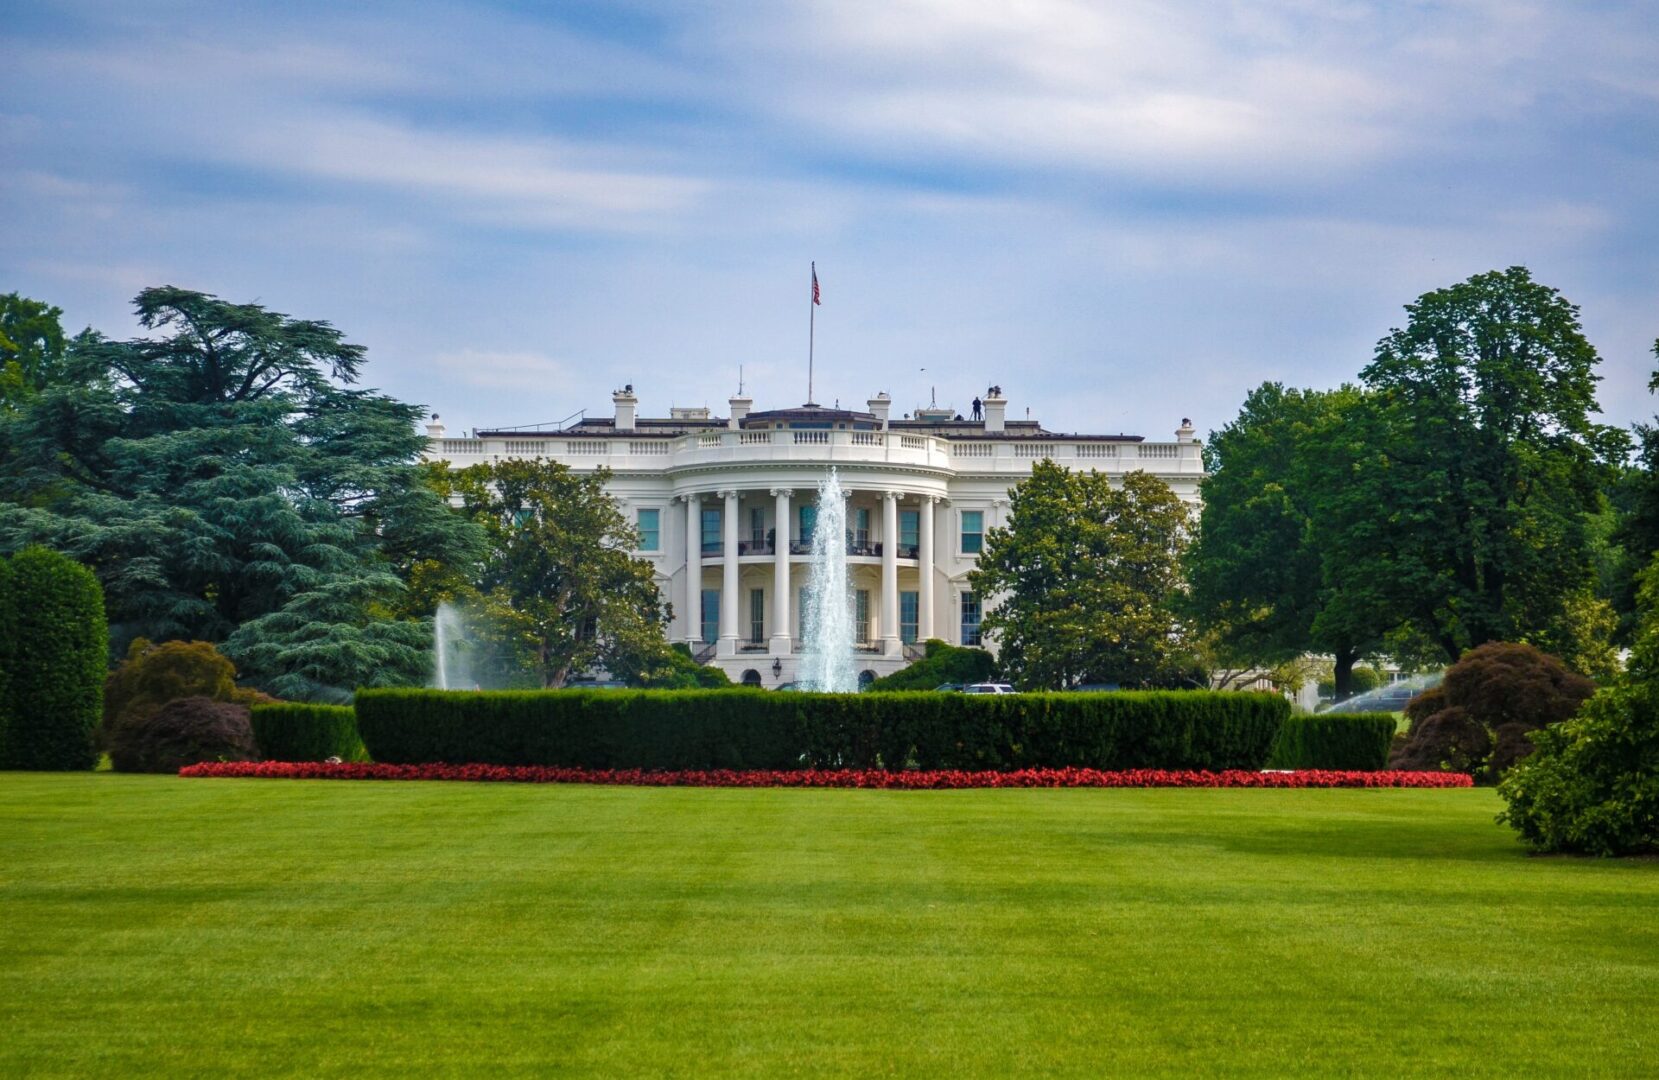 A view of the white house from across the lawn.